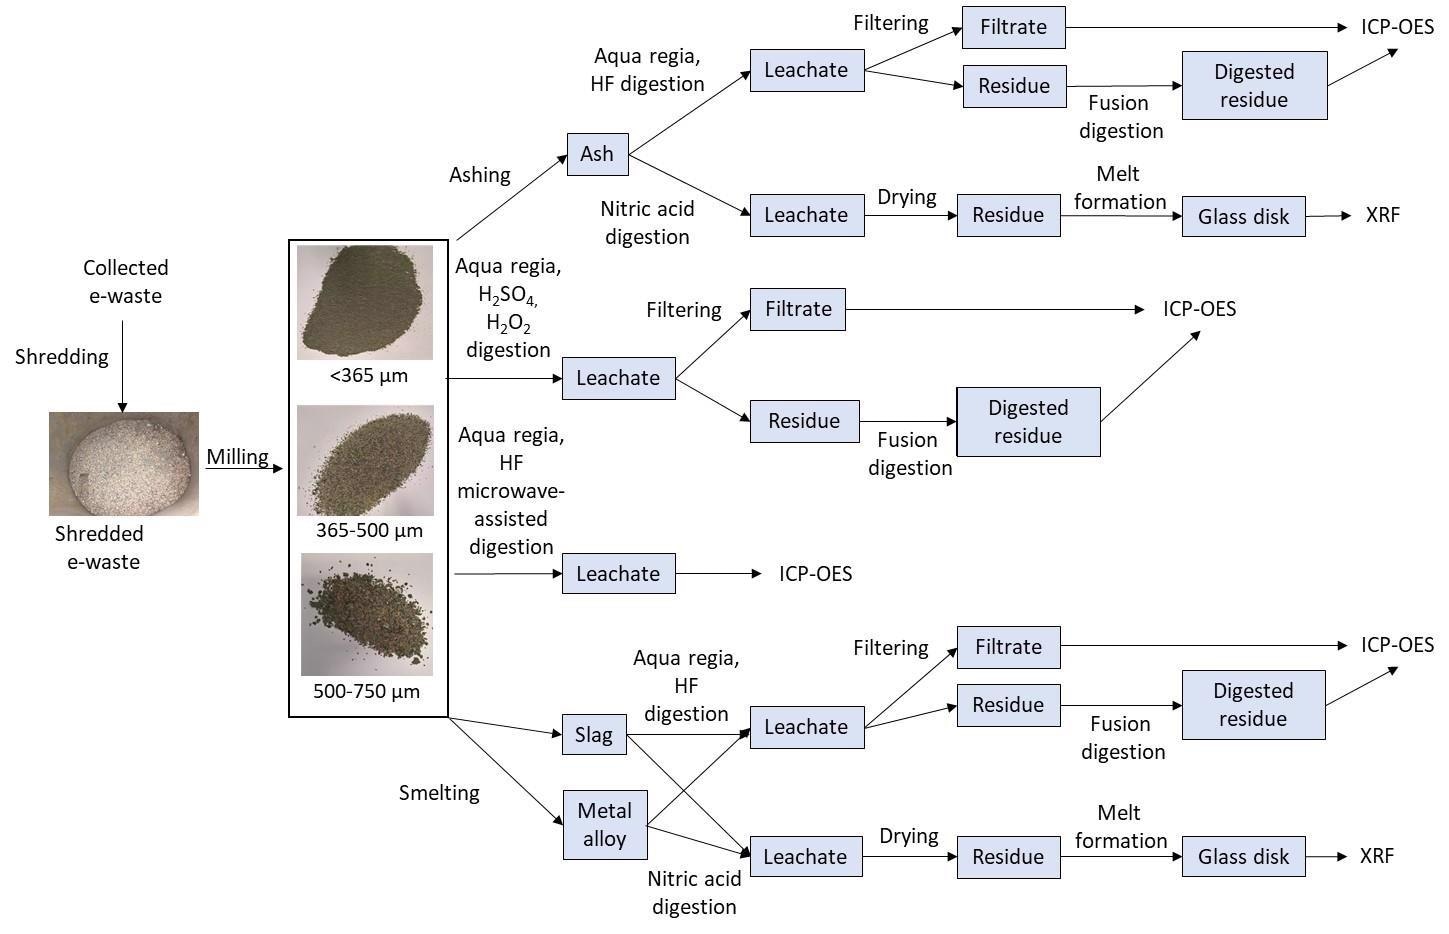 Flowsheet for sample processing and analytical methods examined.